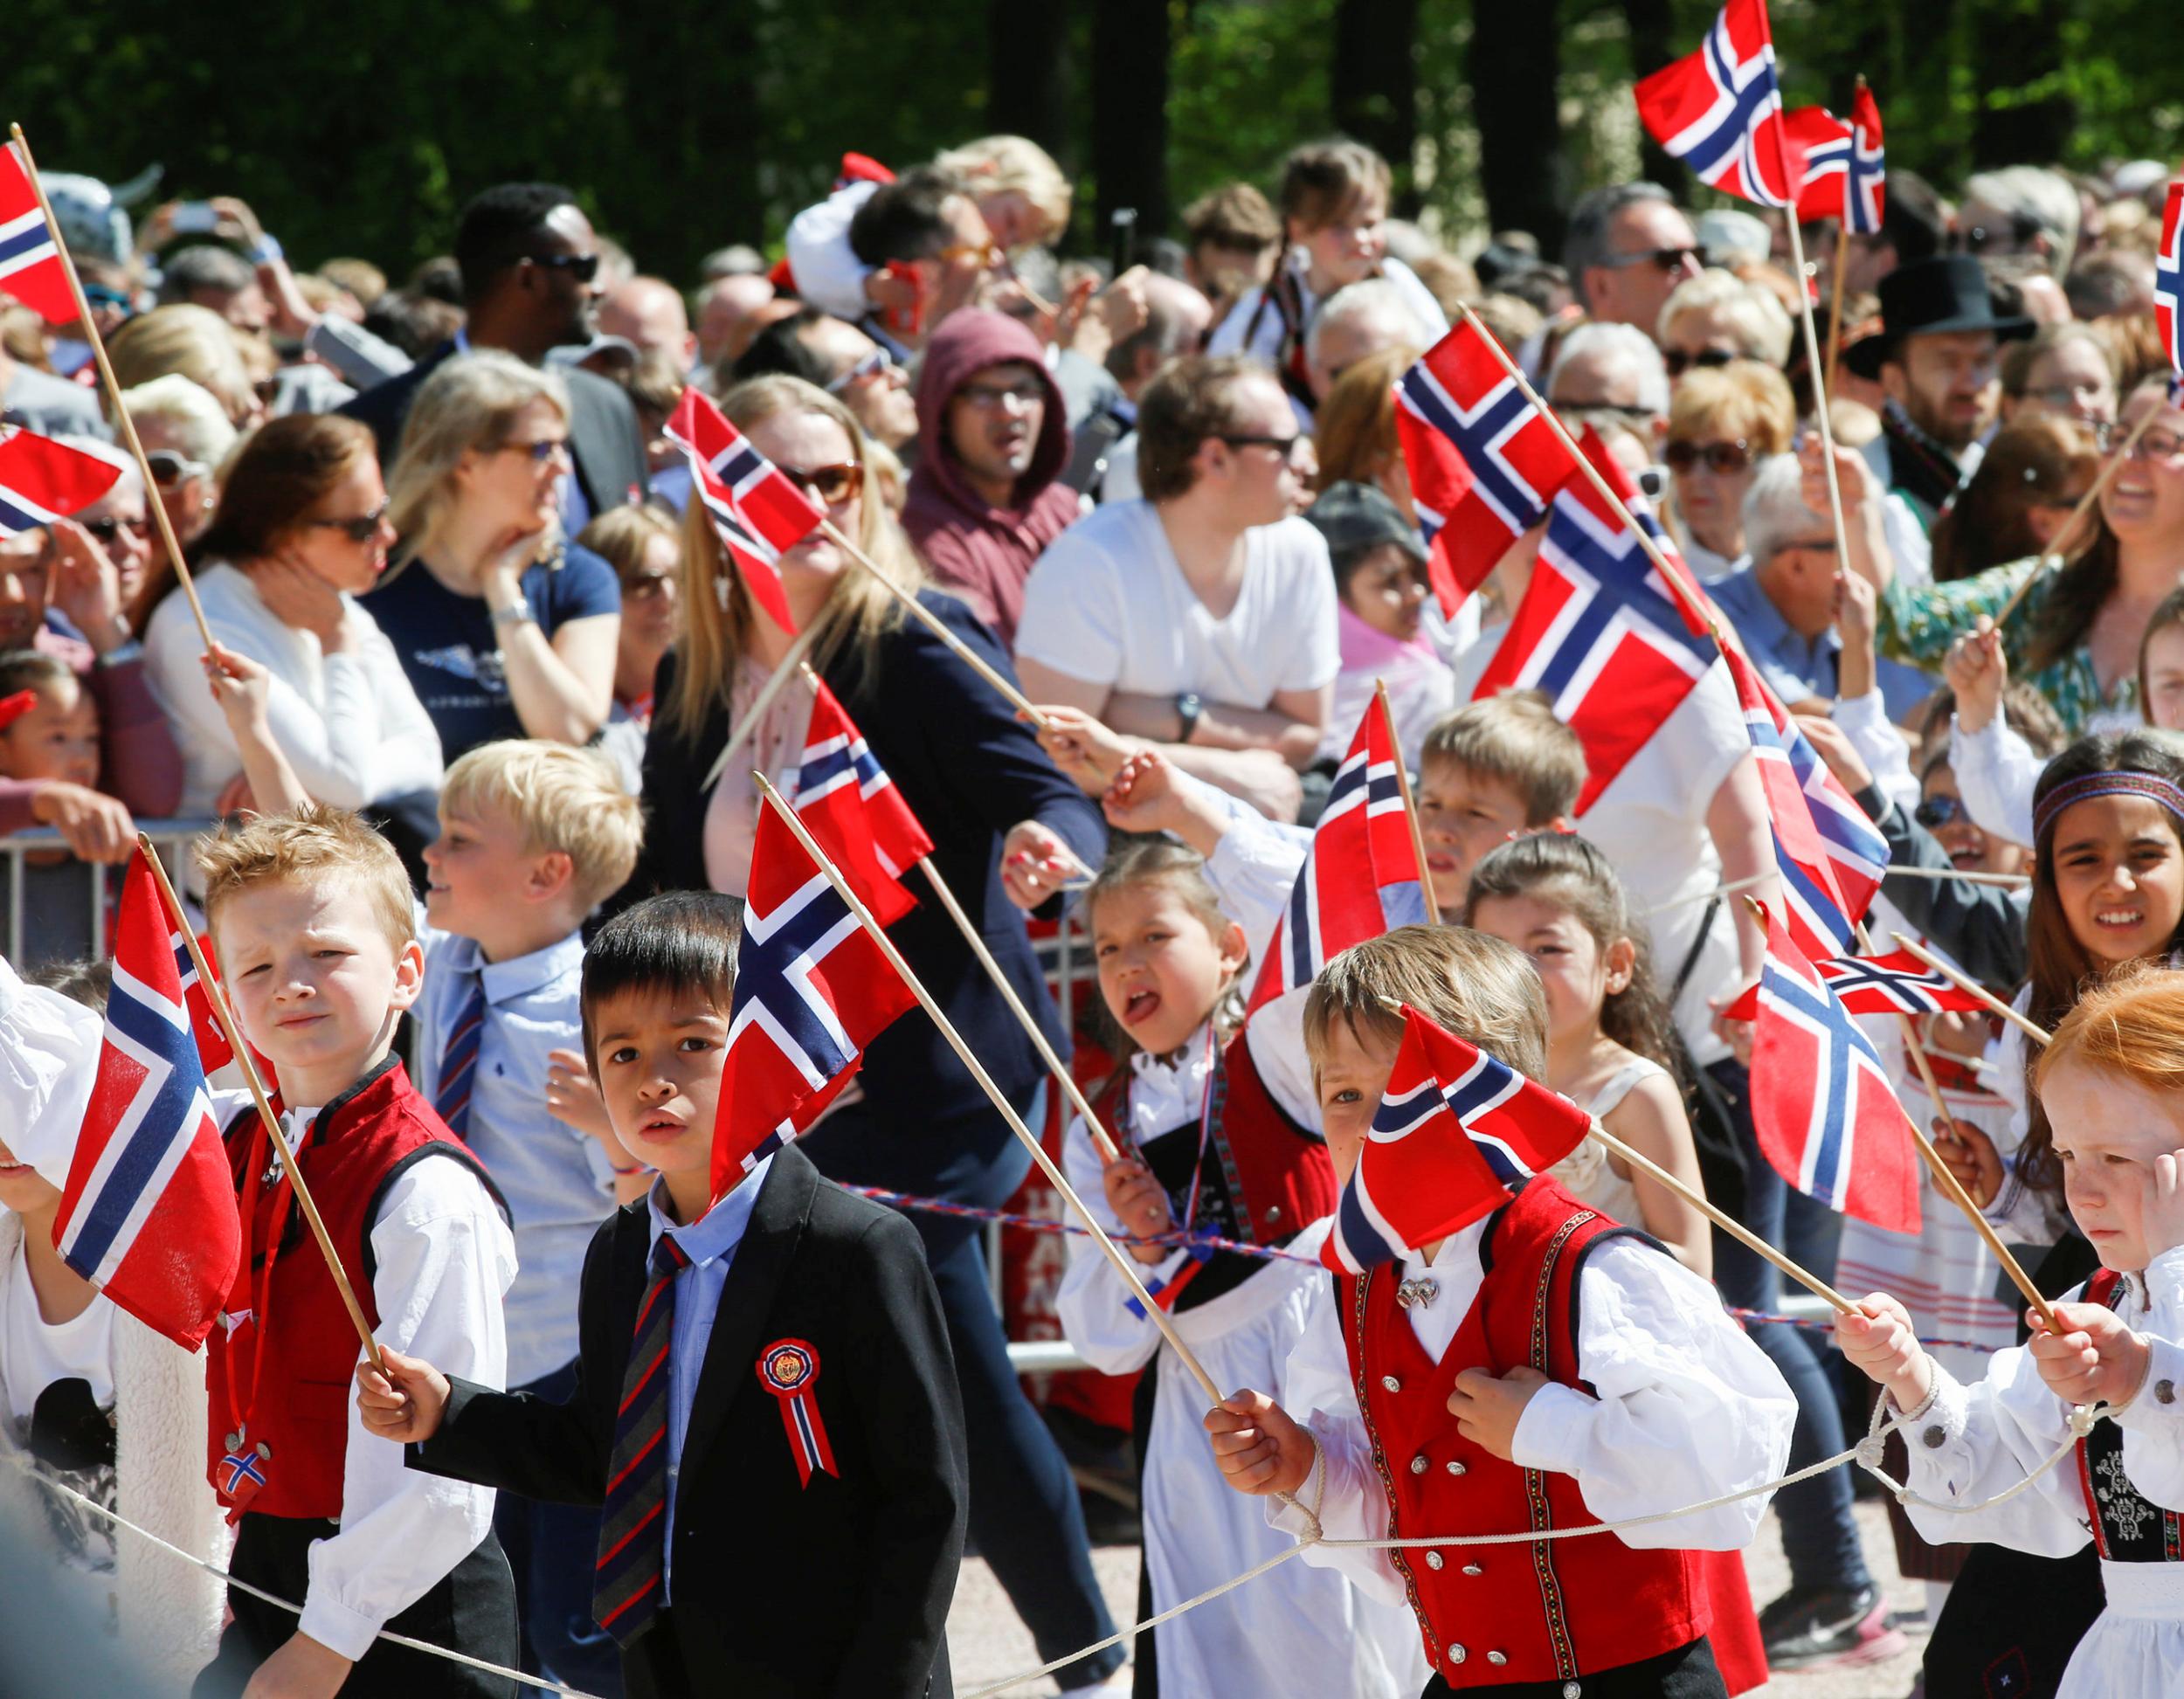 Norwegian Constitution Day: How Norway celebrates national holiday with flags, hot dogs and as much ice cream as you can eat